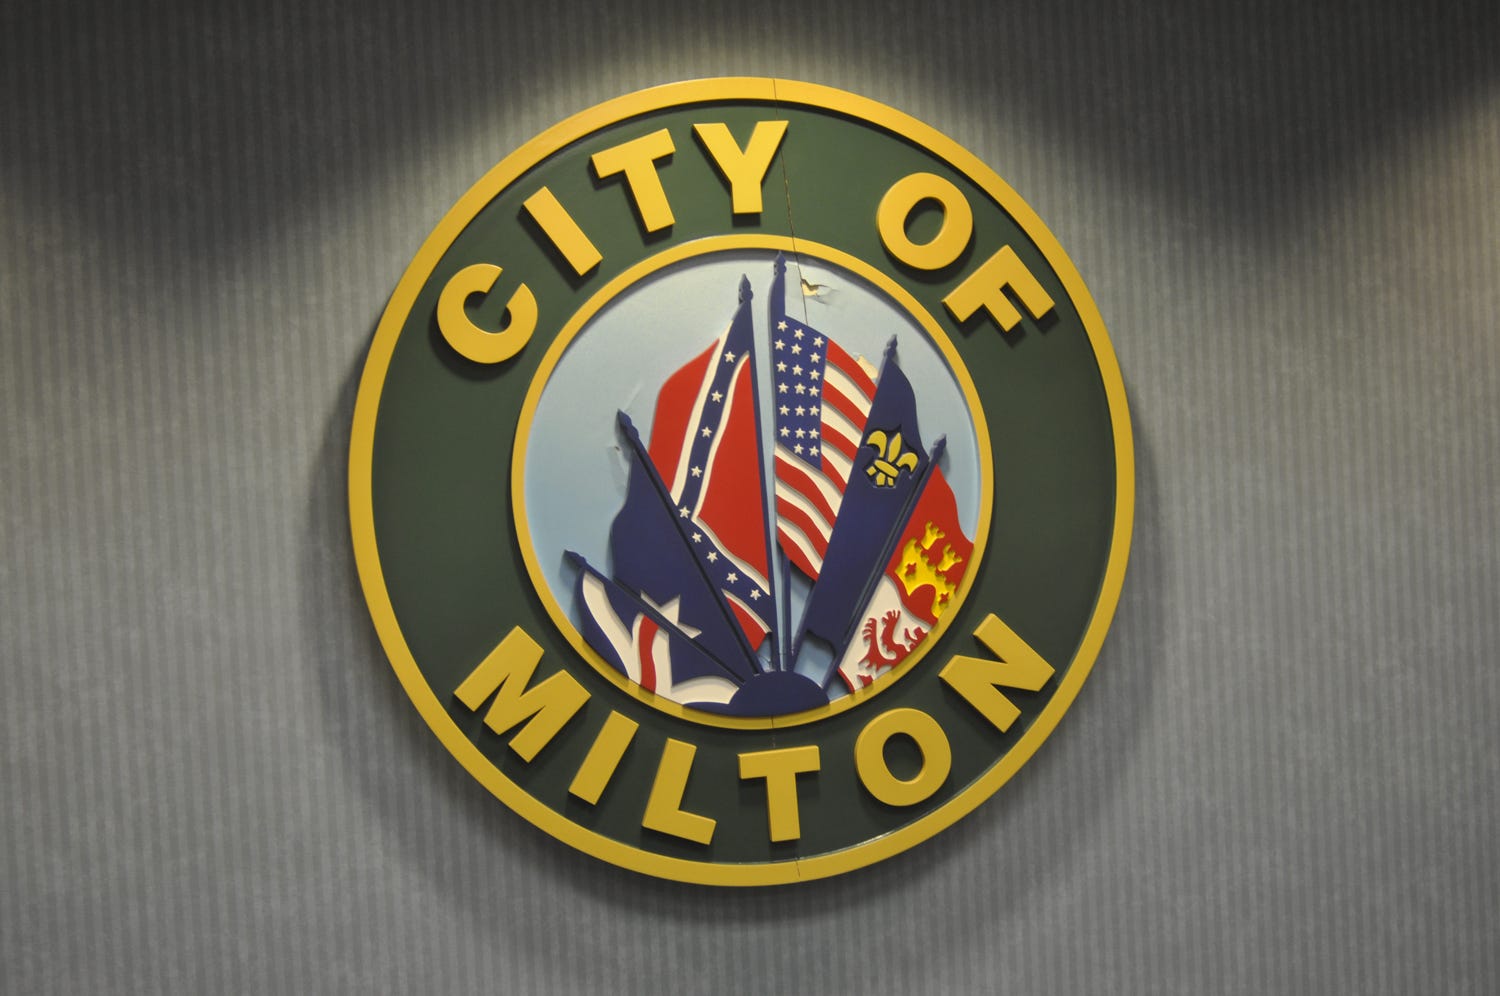 Members of the Milton City Council and Mayor Wesley Meiss shared different views when it came to the Florida Department of Transportation options in order to alleviate traffic congestion along U.S. Highway 90 during Tuesday night’s regular council meeting.